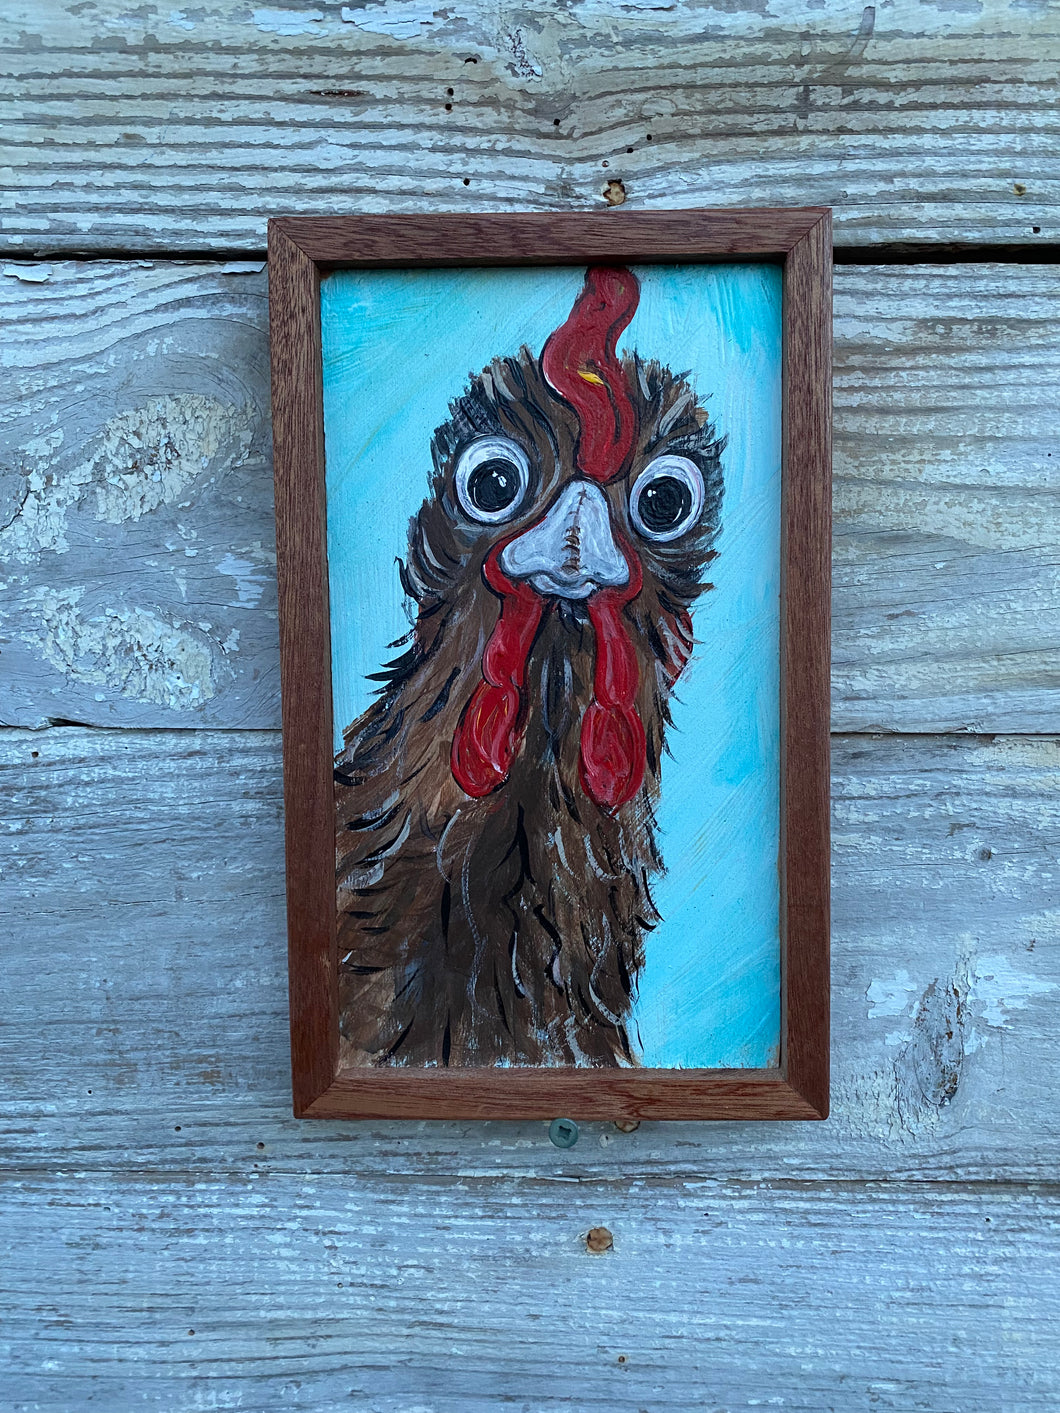 Curious Chicken #8 reclaimed wood painting